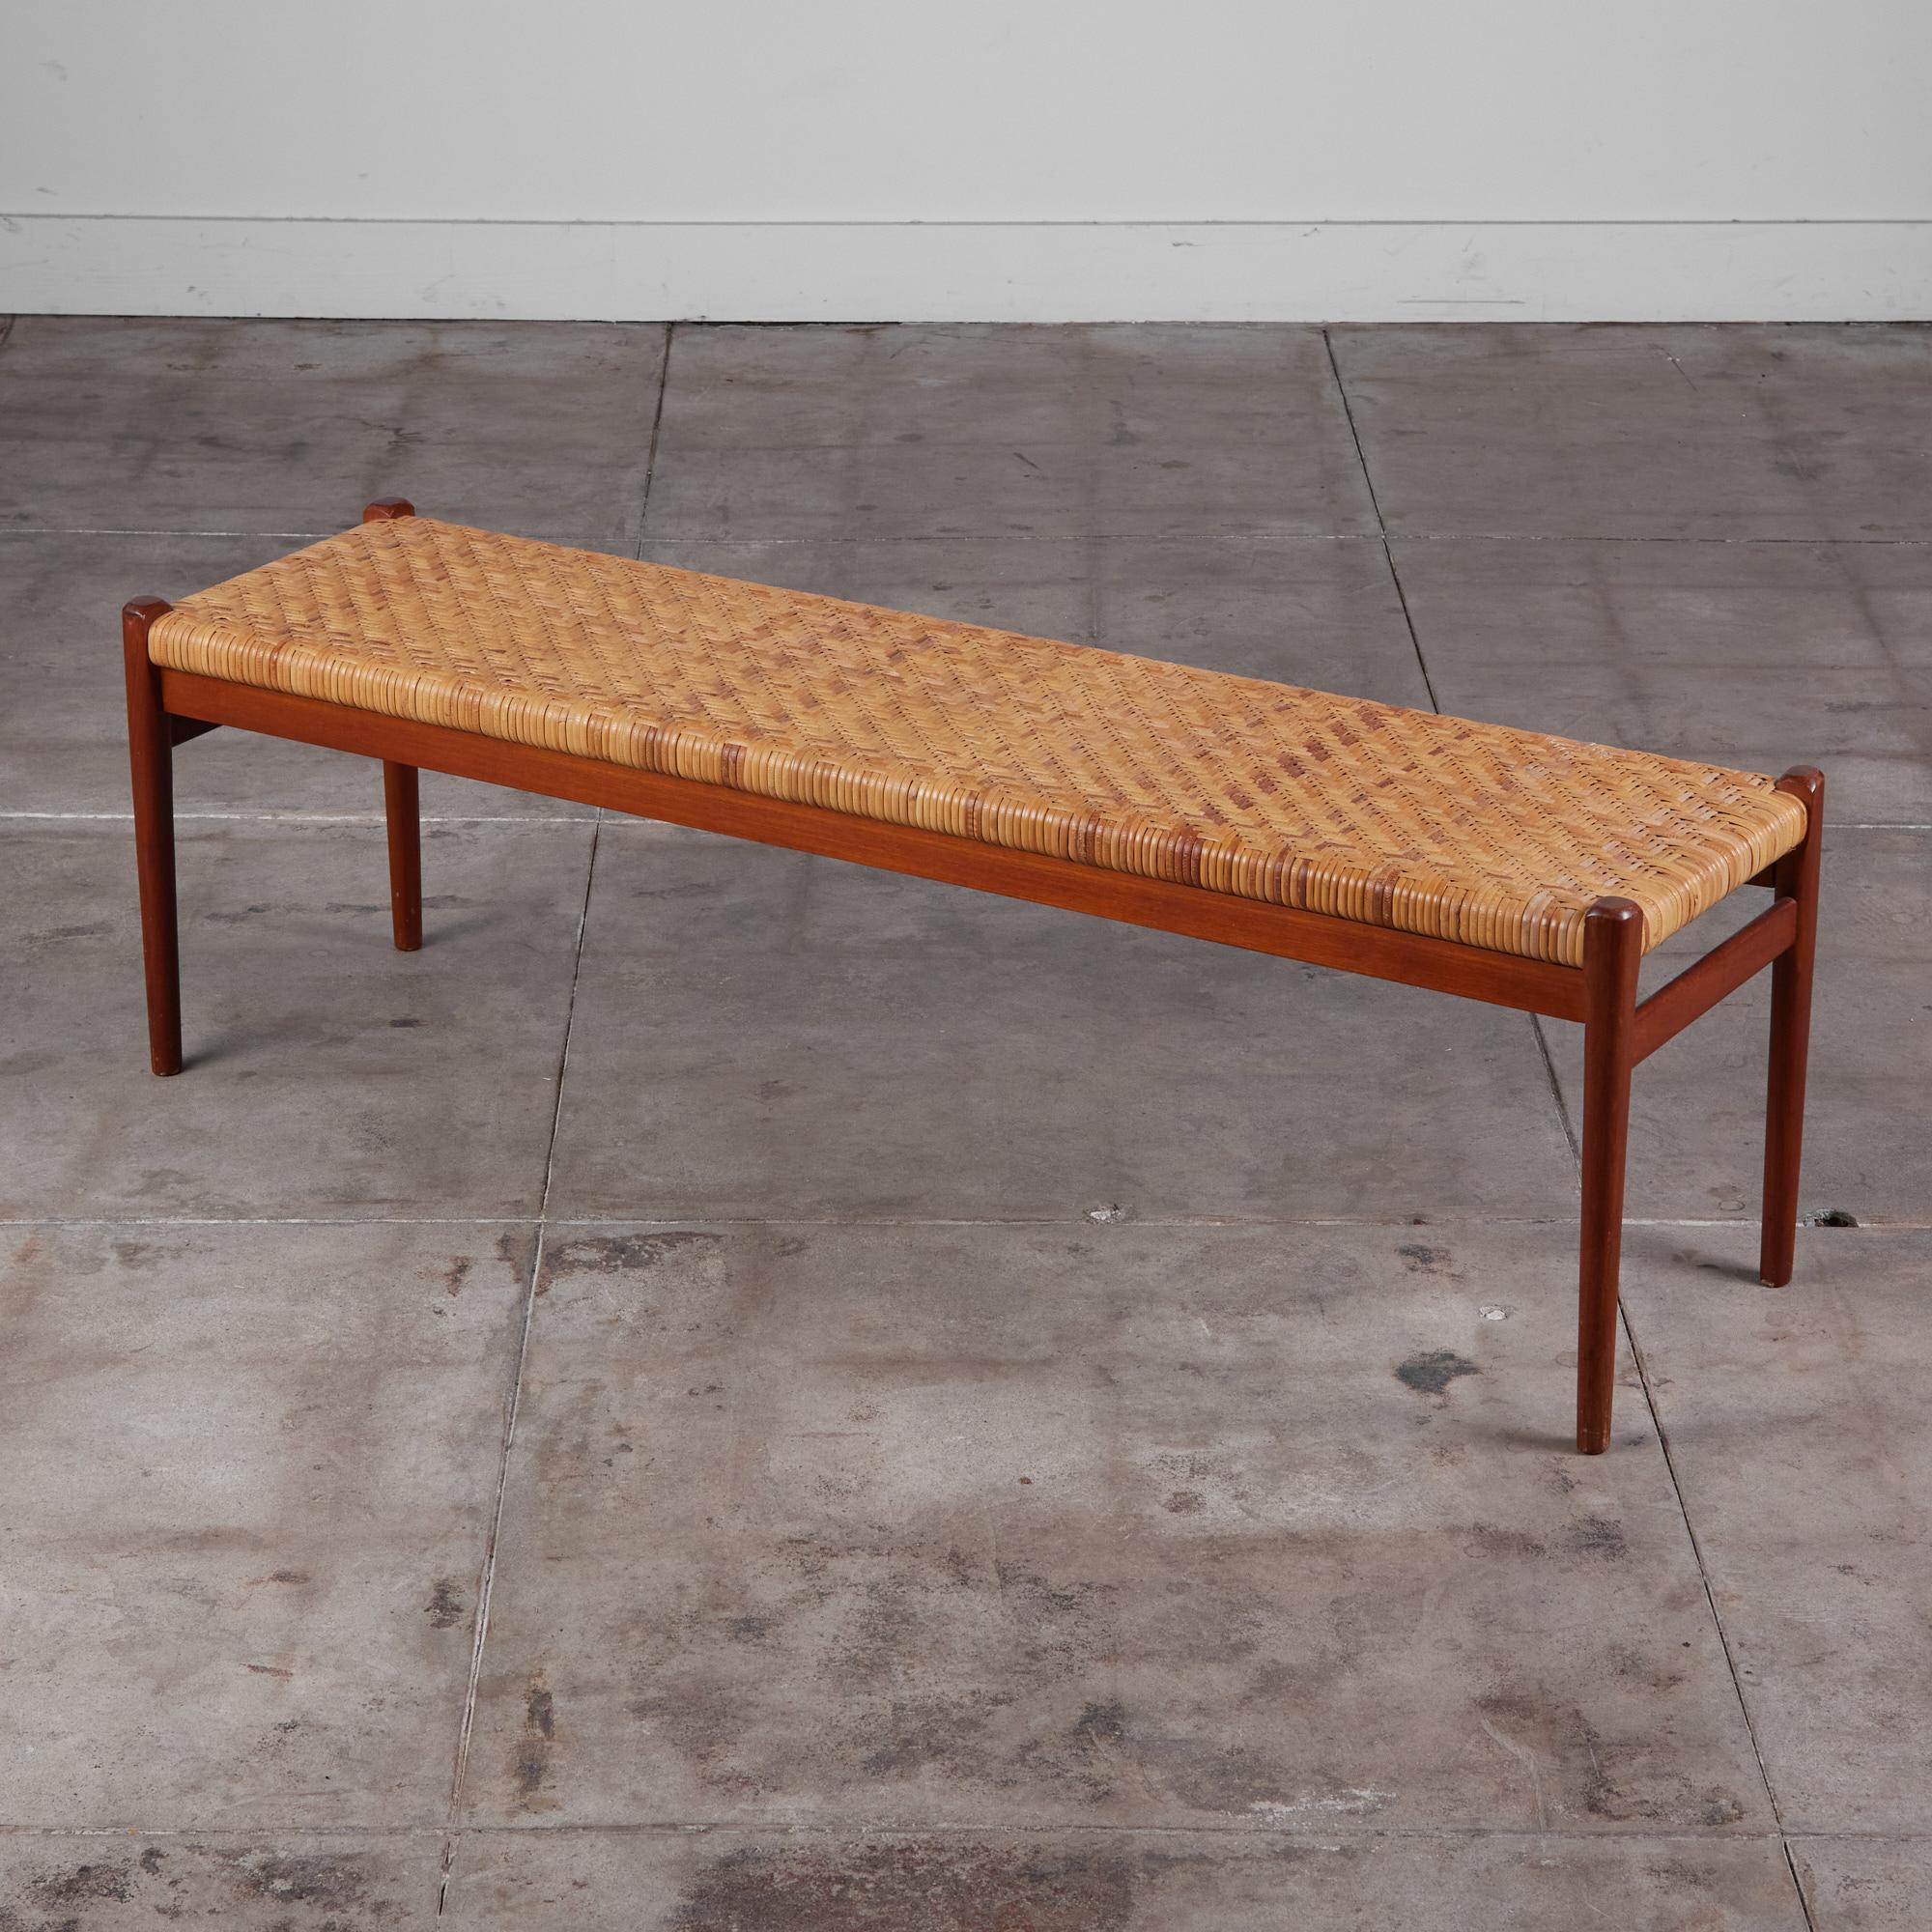 Niels Møller's teak and cane bench for his family’s company, JL Møllers Møbelfabrik, Denmark, c.1960s. The bench features an oiled teak frame and legs with with woven cane.

Retains J.L. Møllers - Made in Denmark stamp on the underside of the